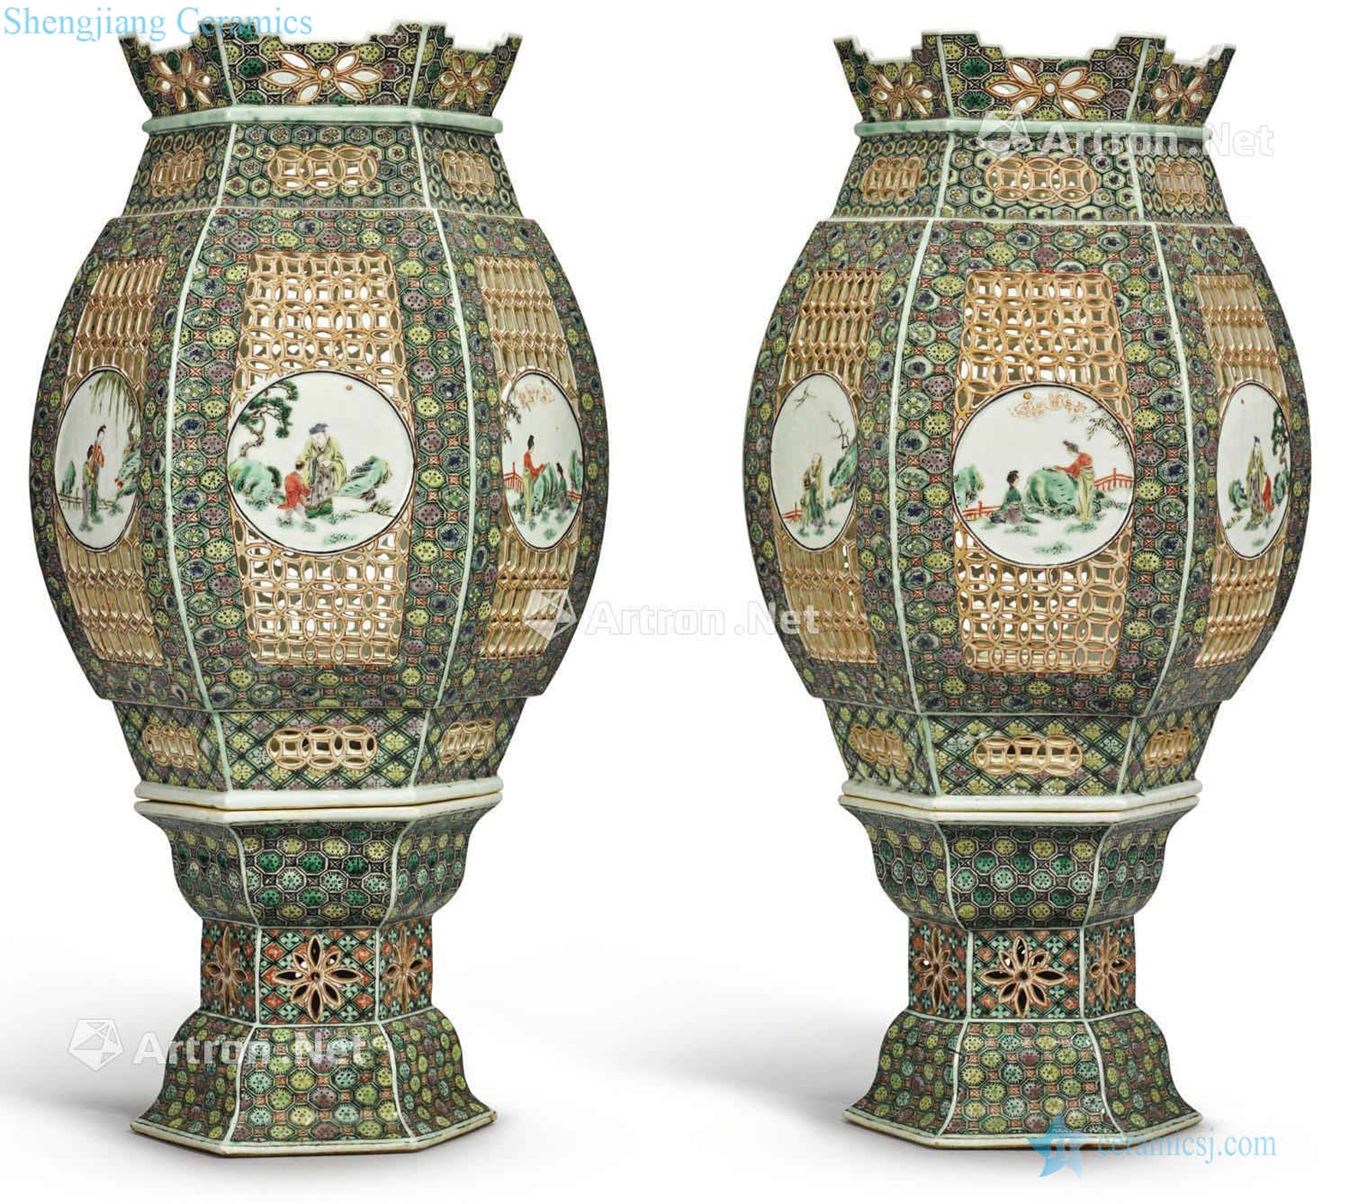 Qing dynasty in the 19th century Colorful hollow-out medallion character figure lanterns (a)